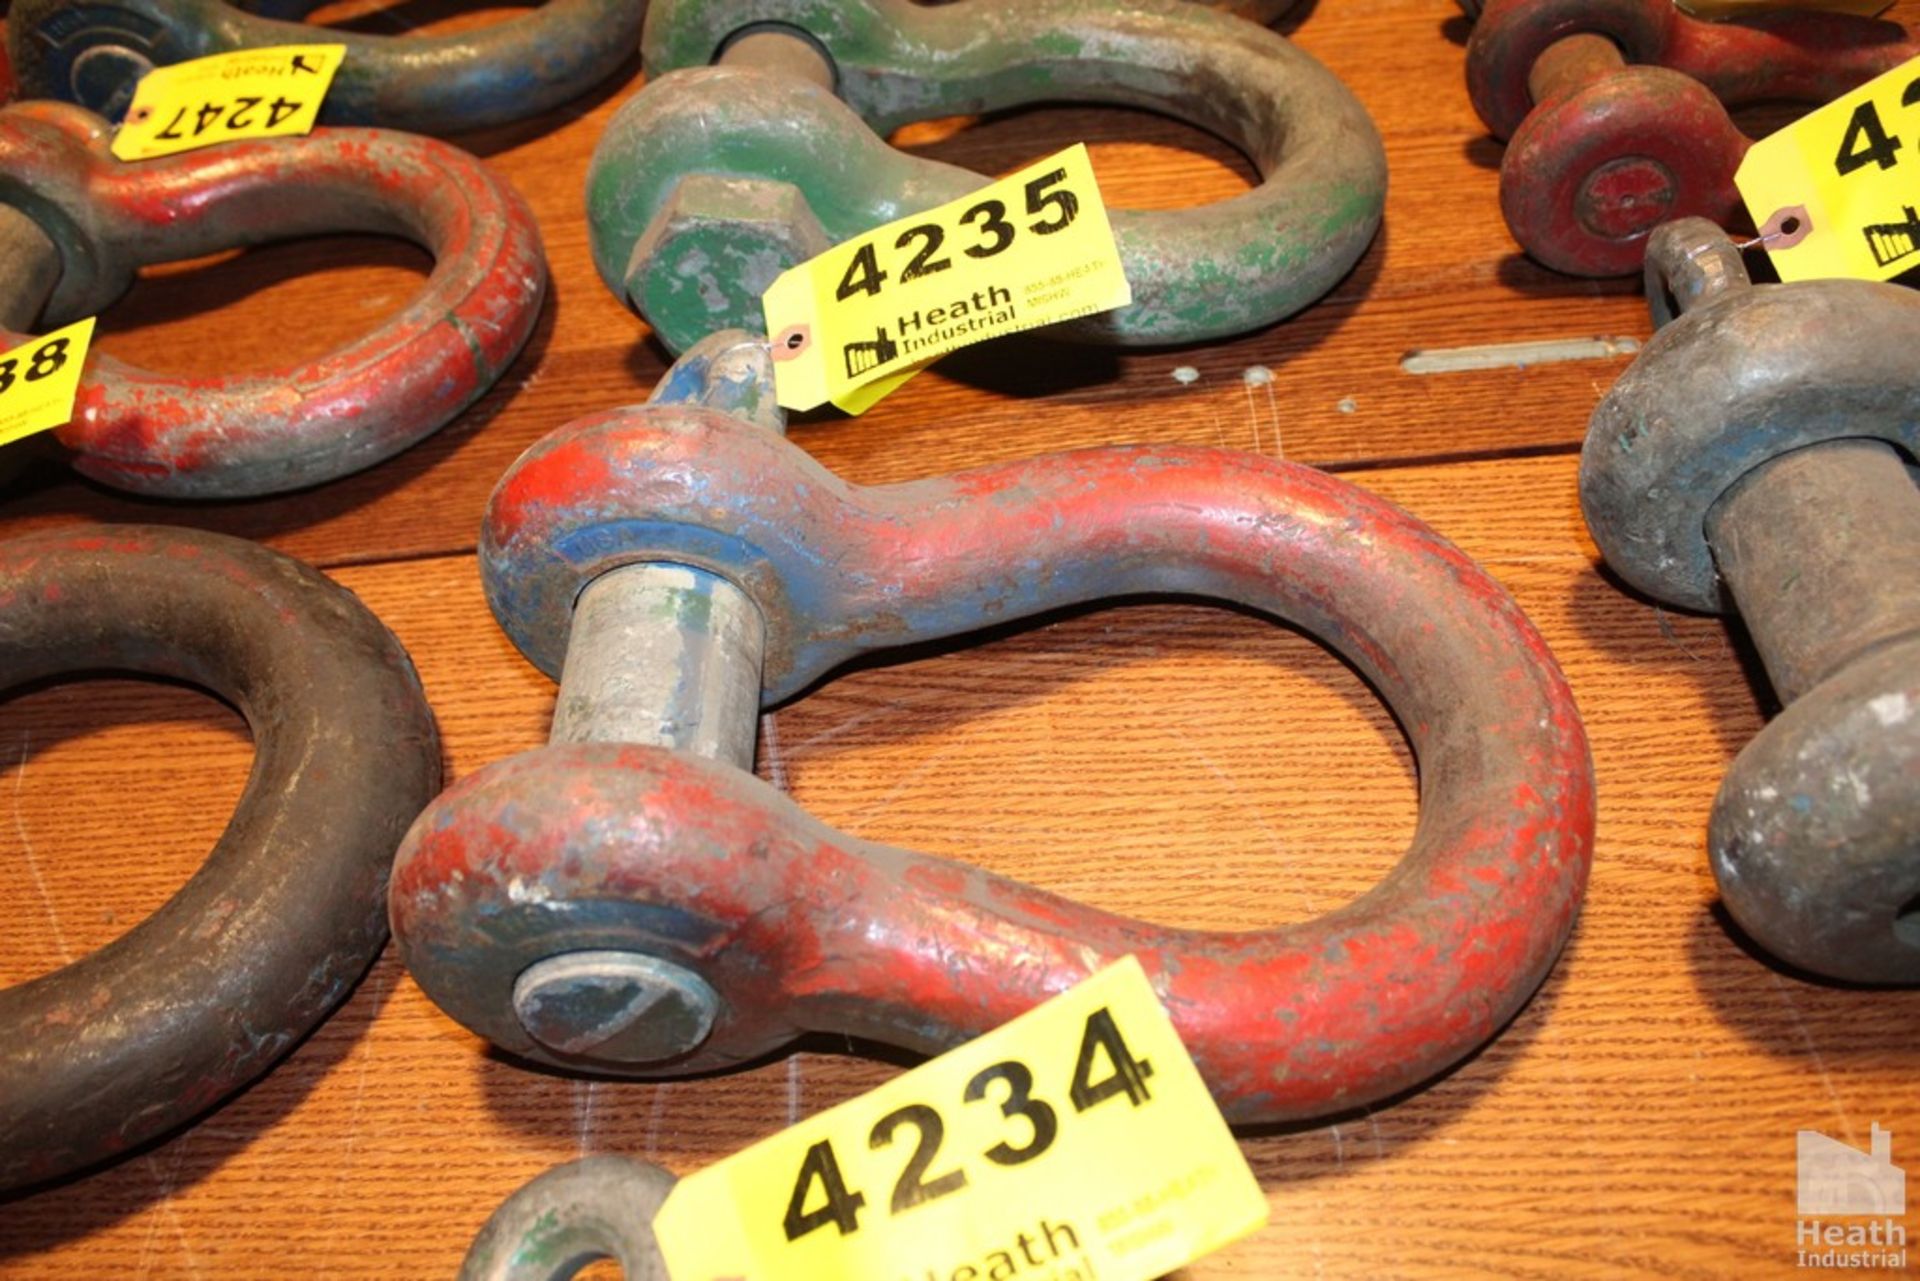 35 TON SHACKLE APPROX. 12" X 9"